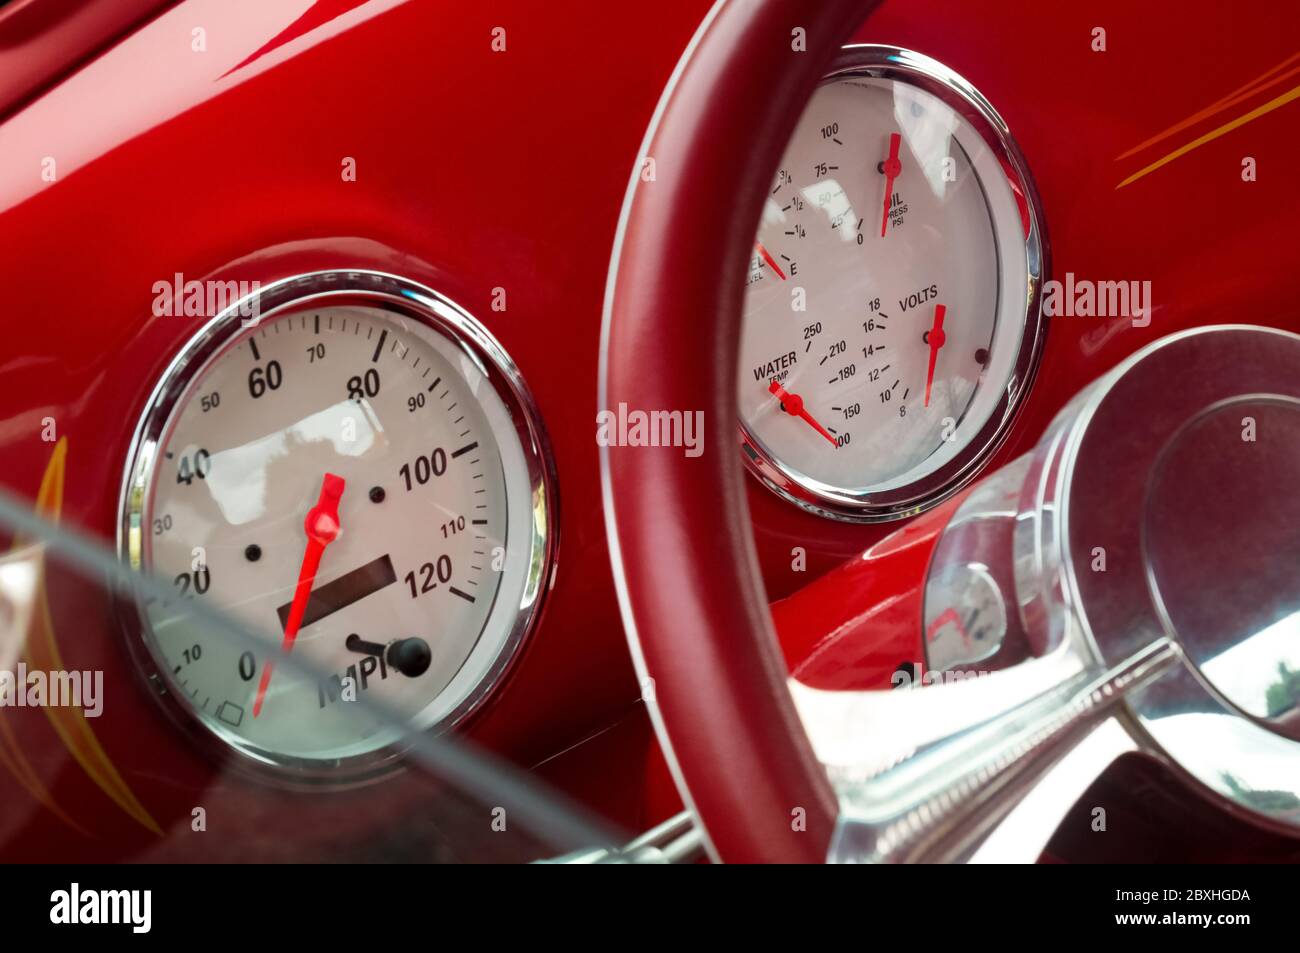 Steering wheel with crome beams, speedometer, fuel, oil, water, volts dials on front panel of red old timer car Stock Photo